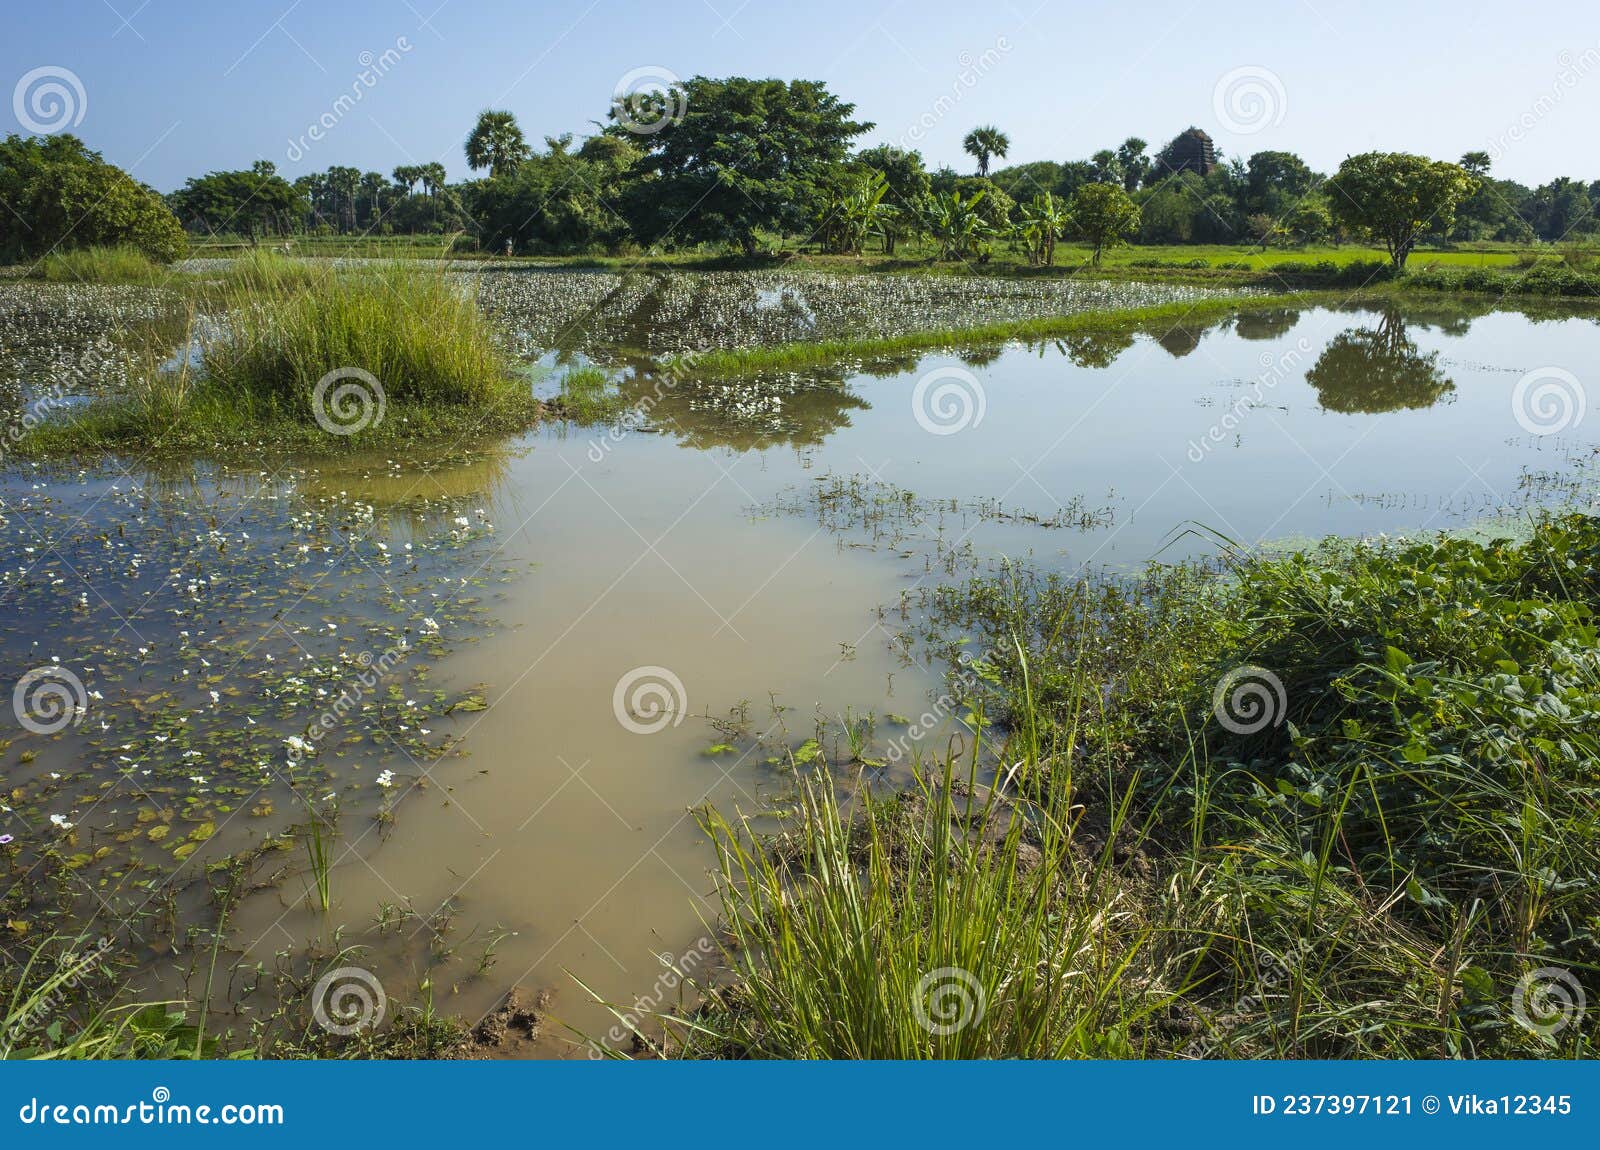 Rice Fields Flooded with Water in Inwa Ava, Myanmar Stock Image - Image ...